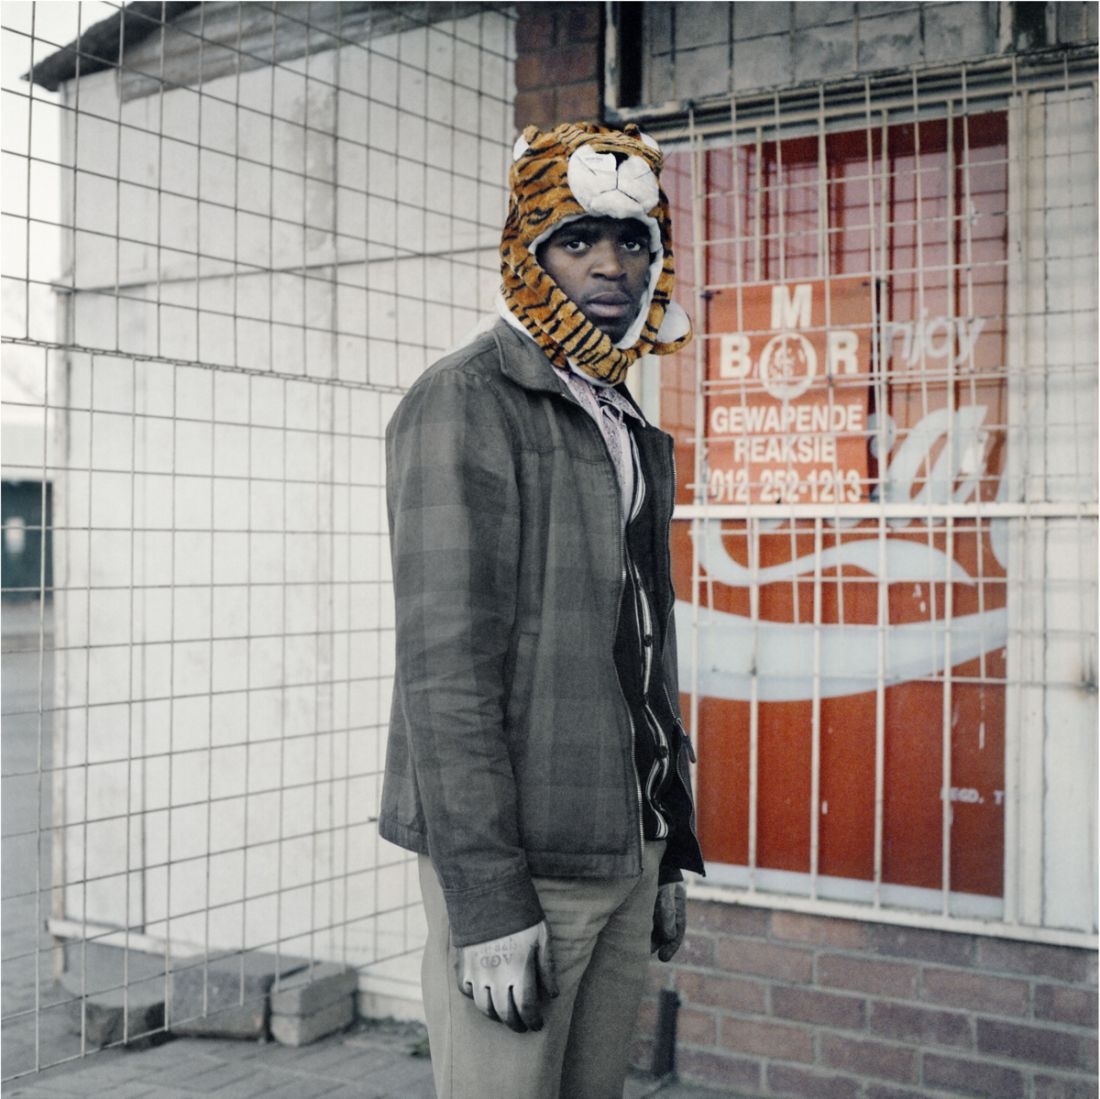 Second Transition, Tiger, 2012; Courtesy of the artist and Goodman Gallery